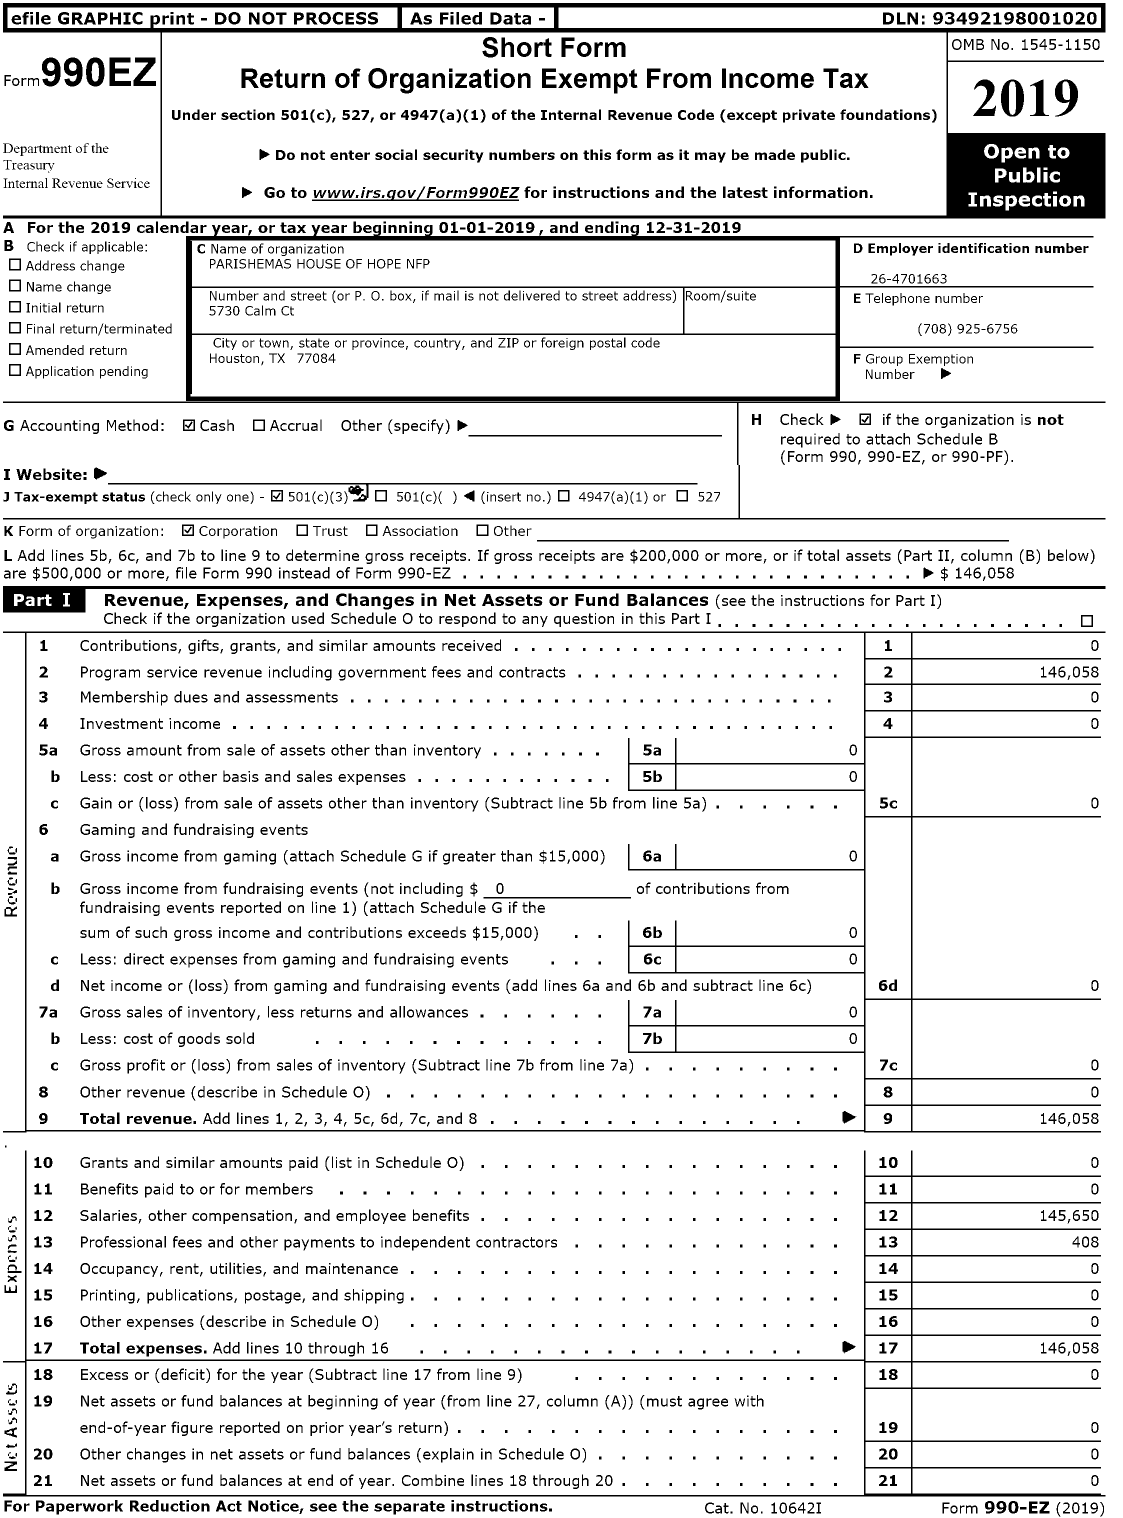 Image of first page of 2019 Form 990EZ for Parishemas House of Hope NFP